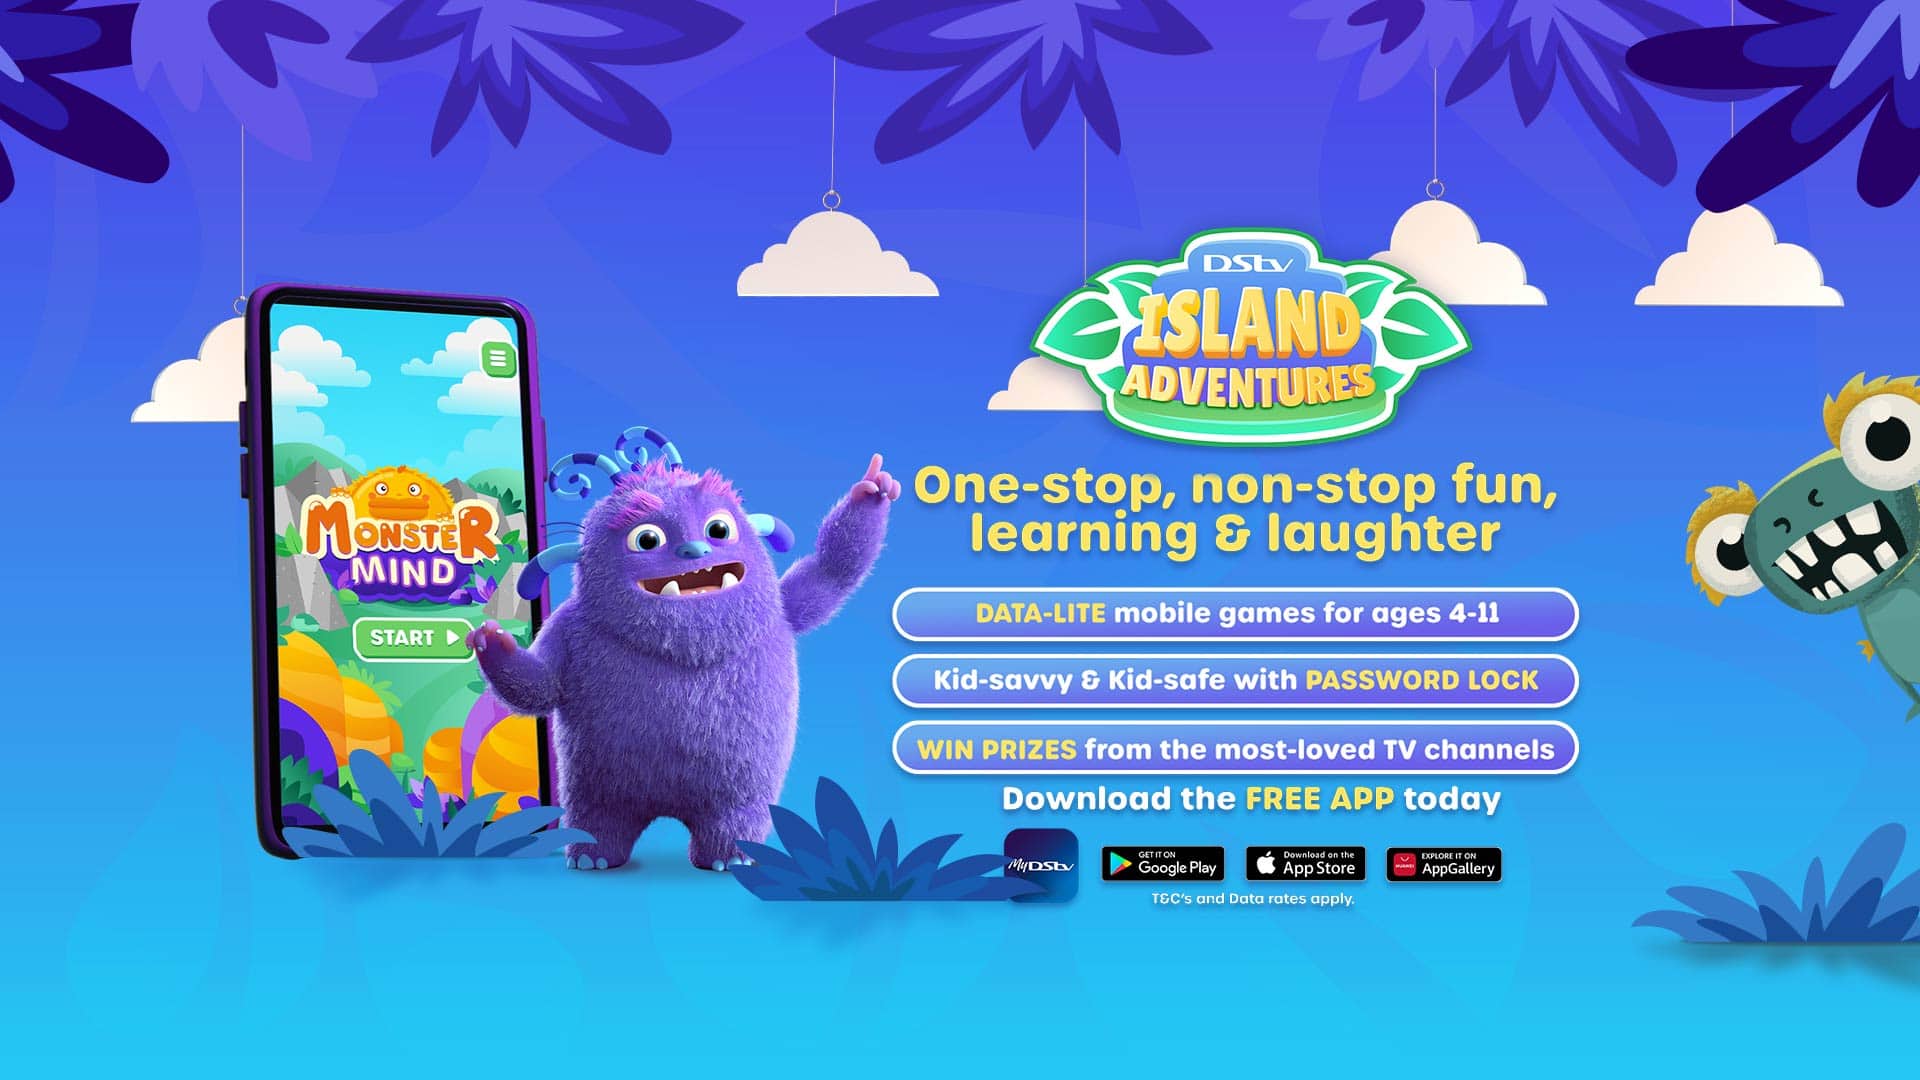 Send your kids on DStv Island Adventures with the MyDStv App